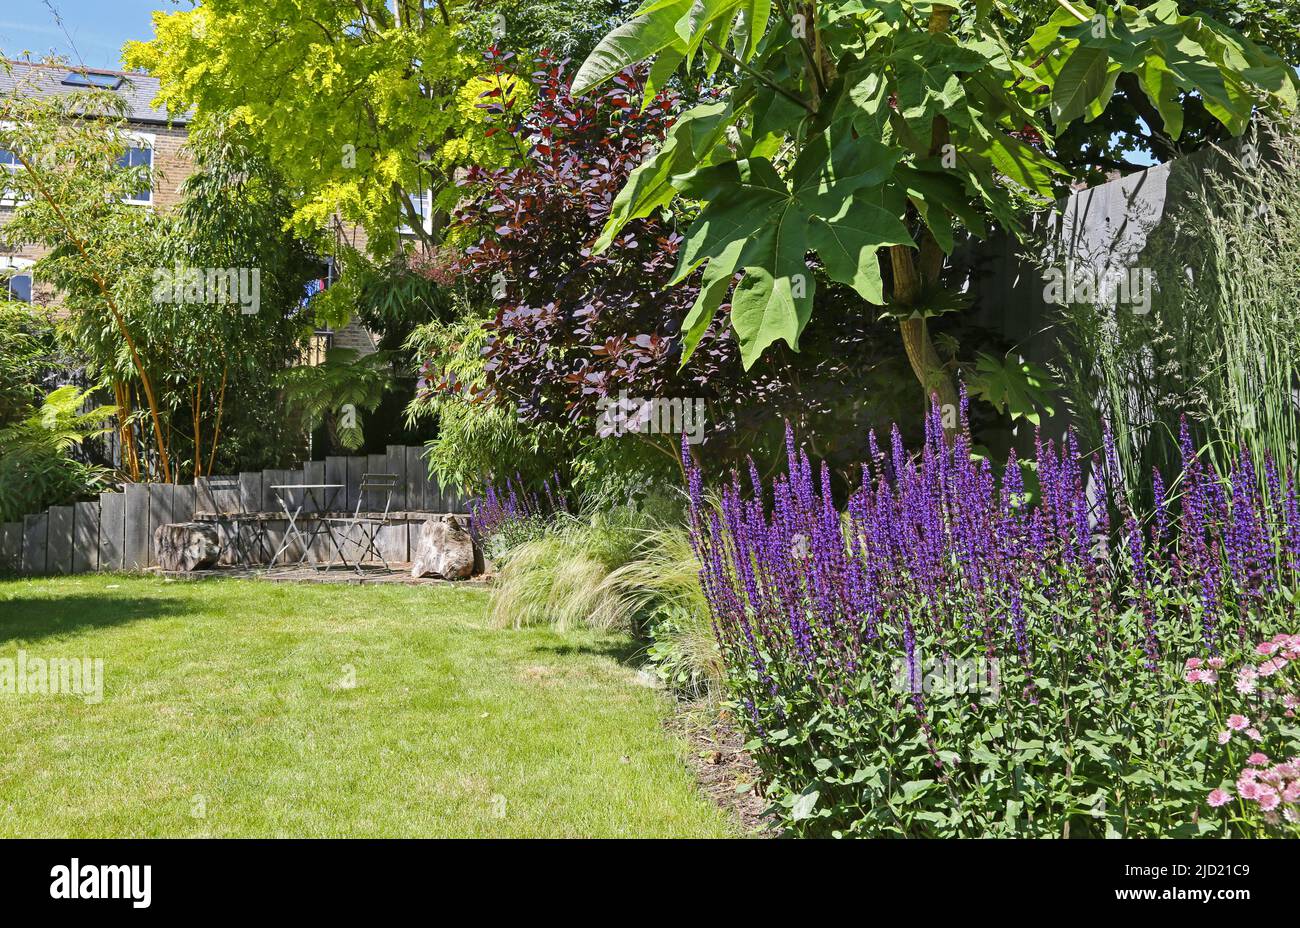 A plant-filled back garden in South London, UK. Shows timber seating area and bamboo (left), lawn, ornamental grasses and purple Salvia Nemorosa. Stock Photo